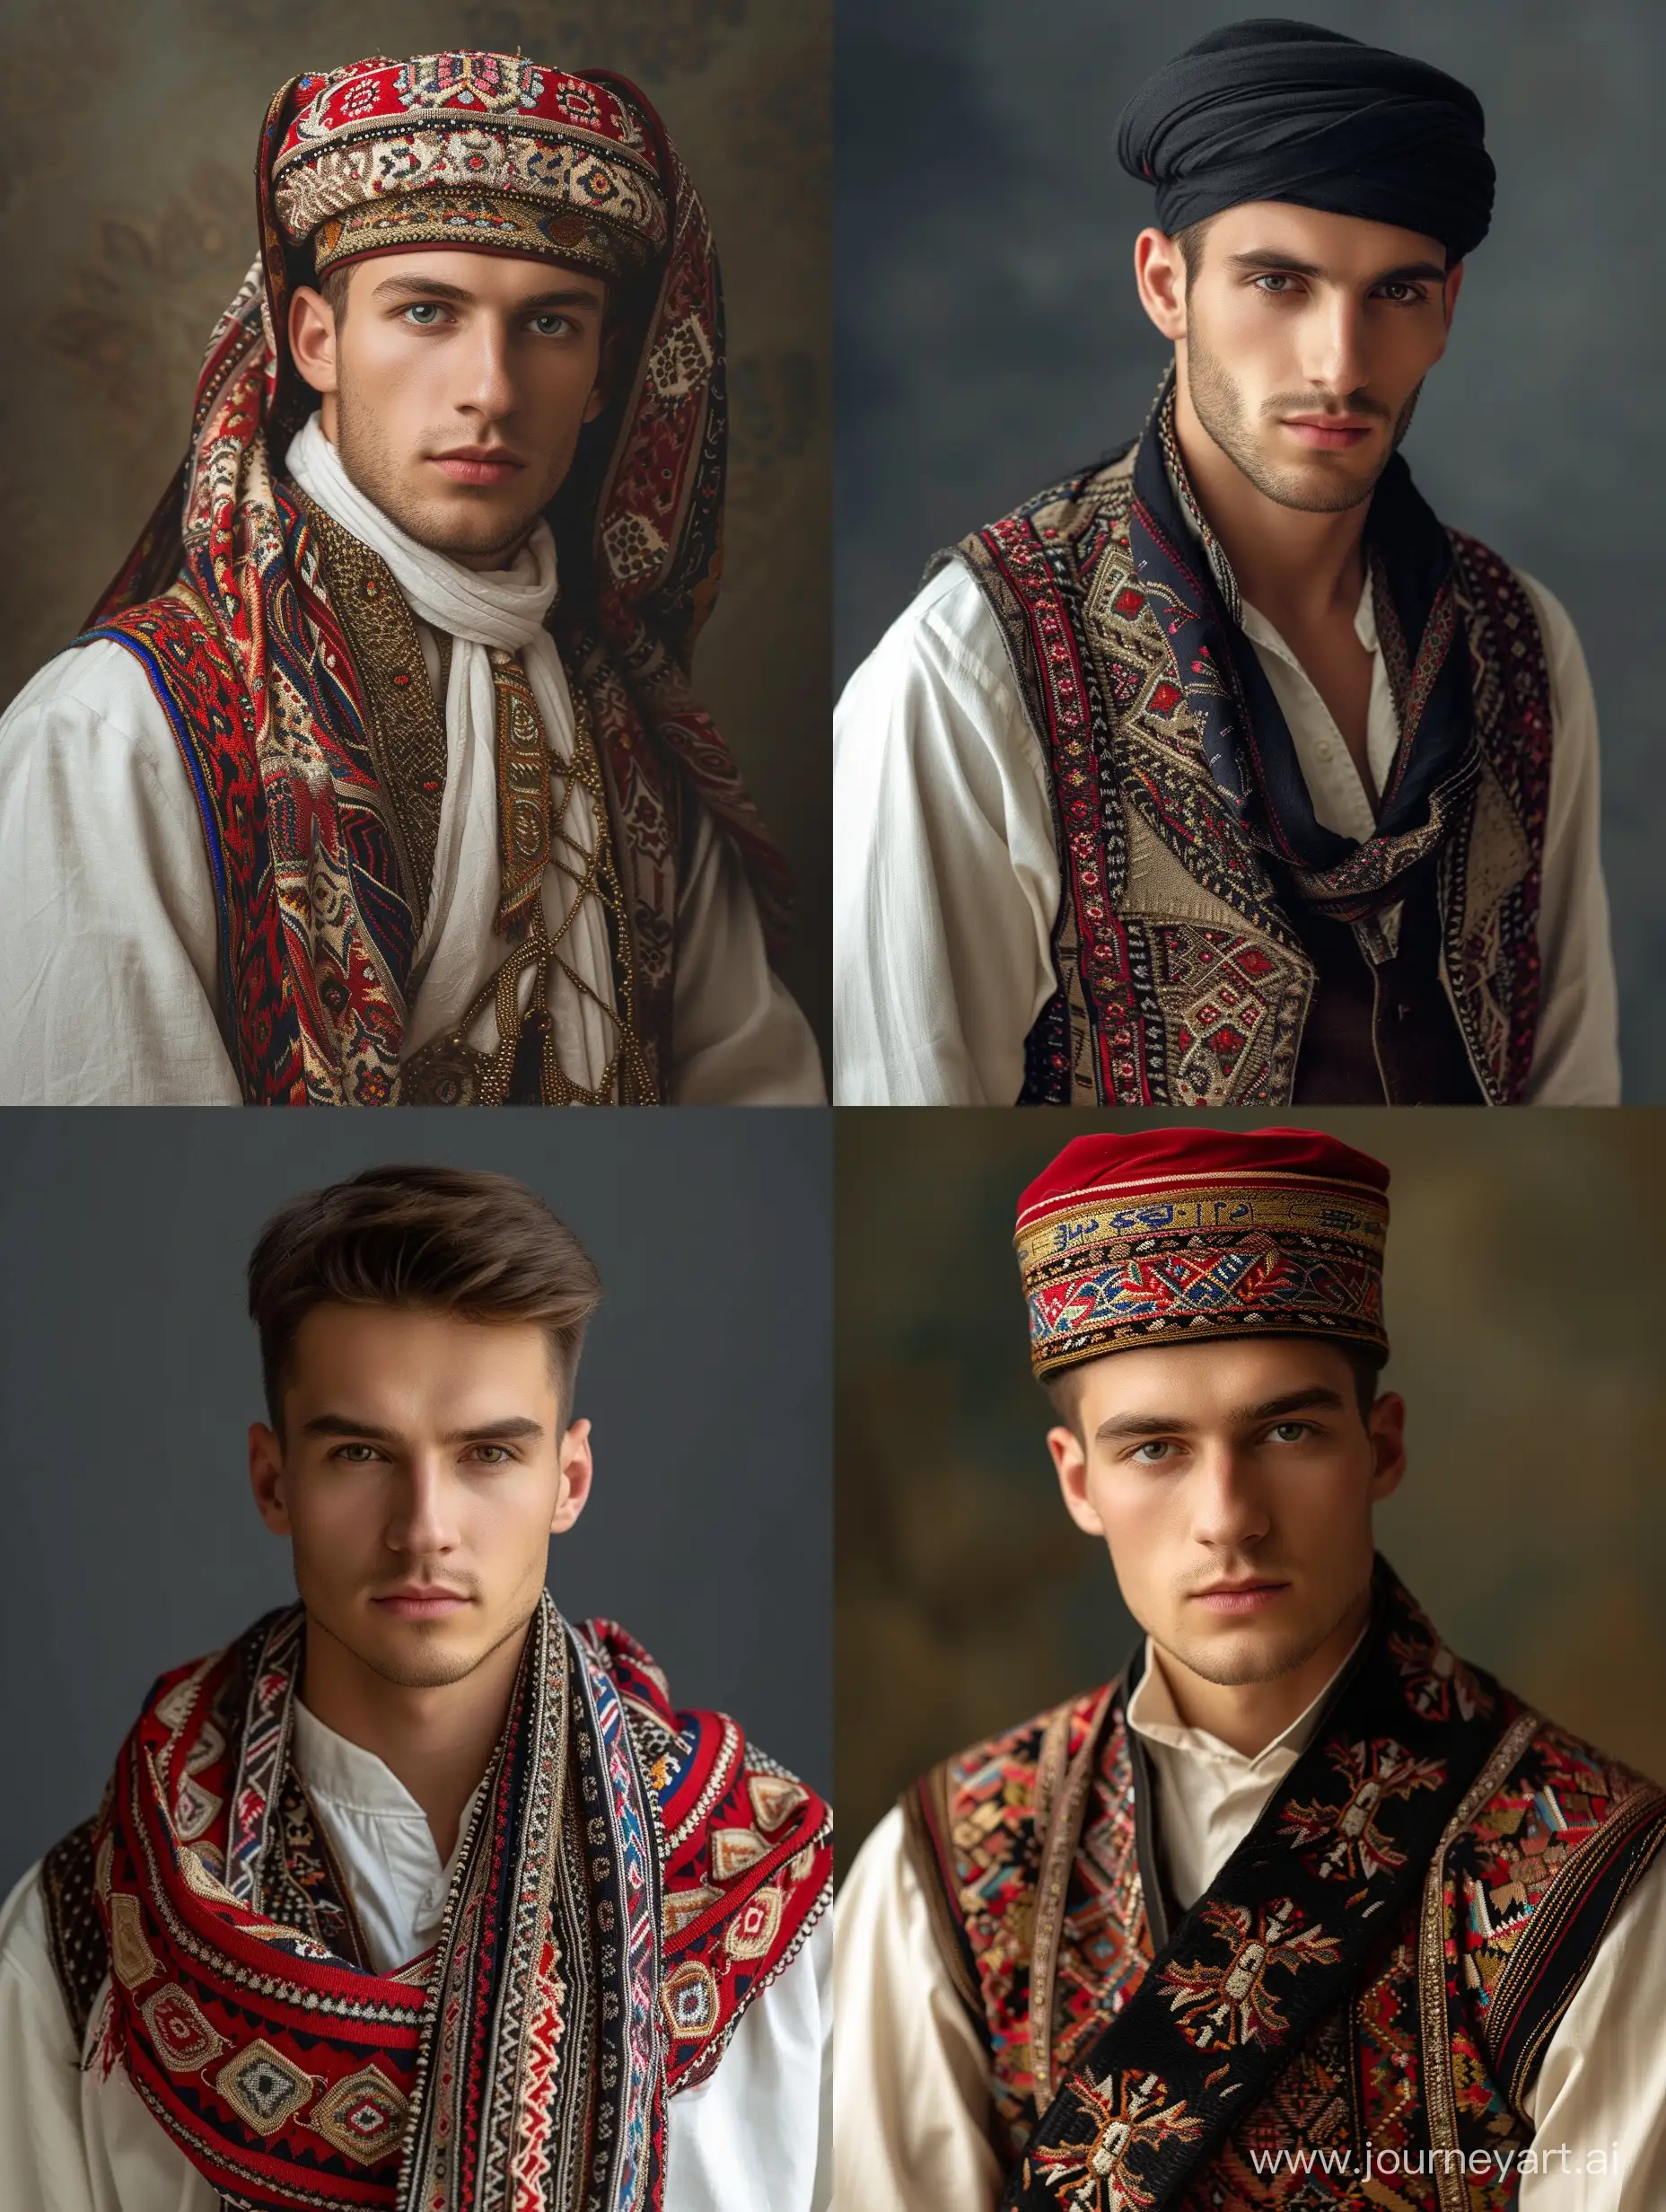 Handsome-Bosnian-Man-in-Traditional-Clothing-Authentic-4K-Realistic-Portrait